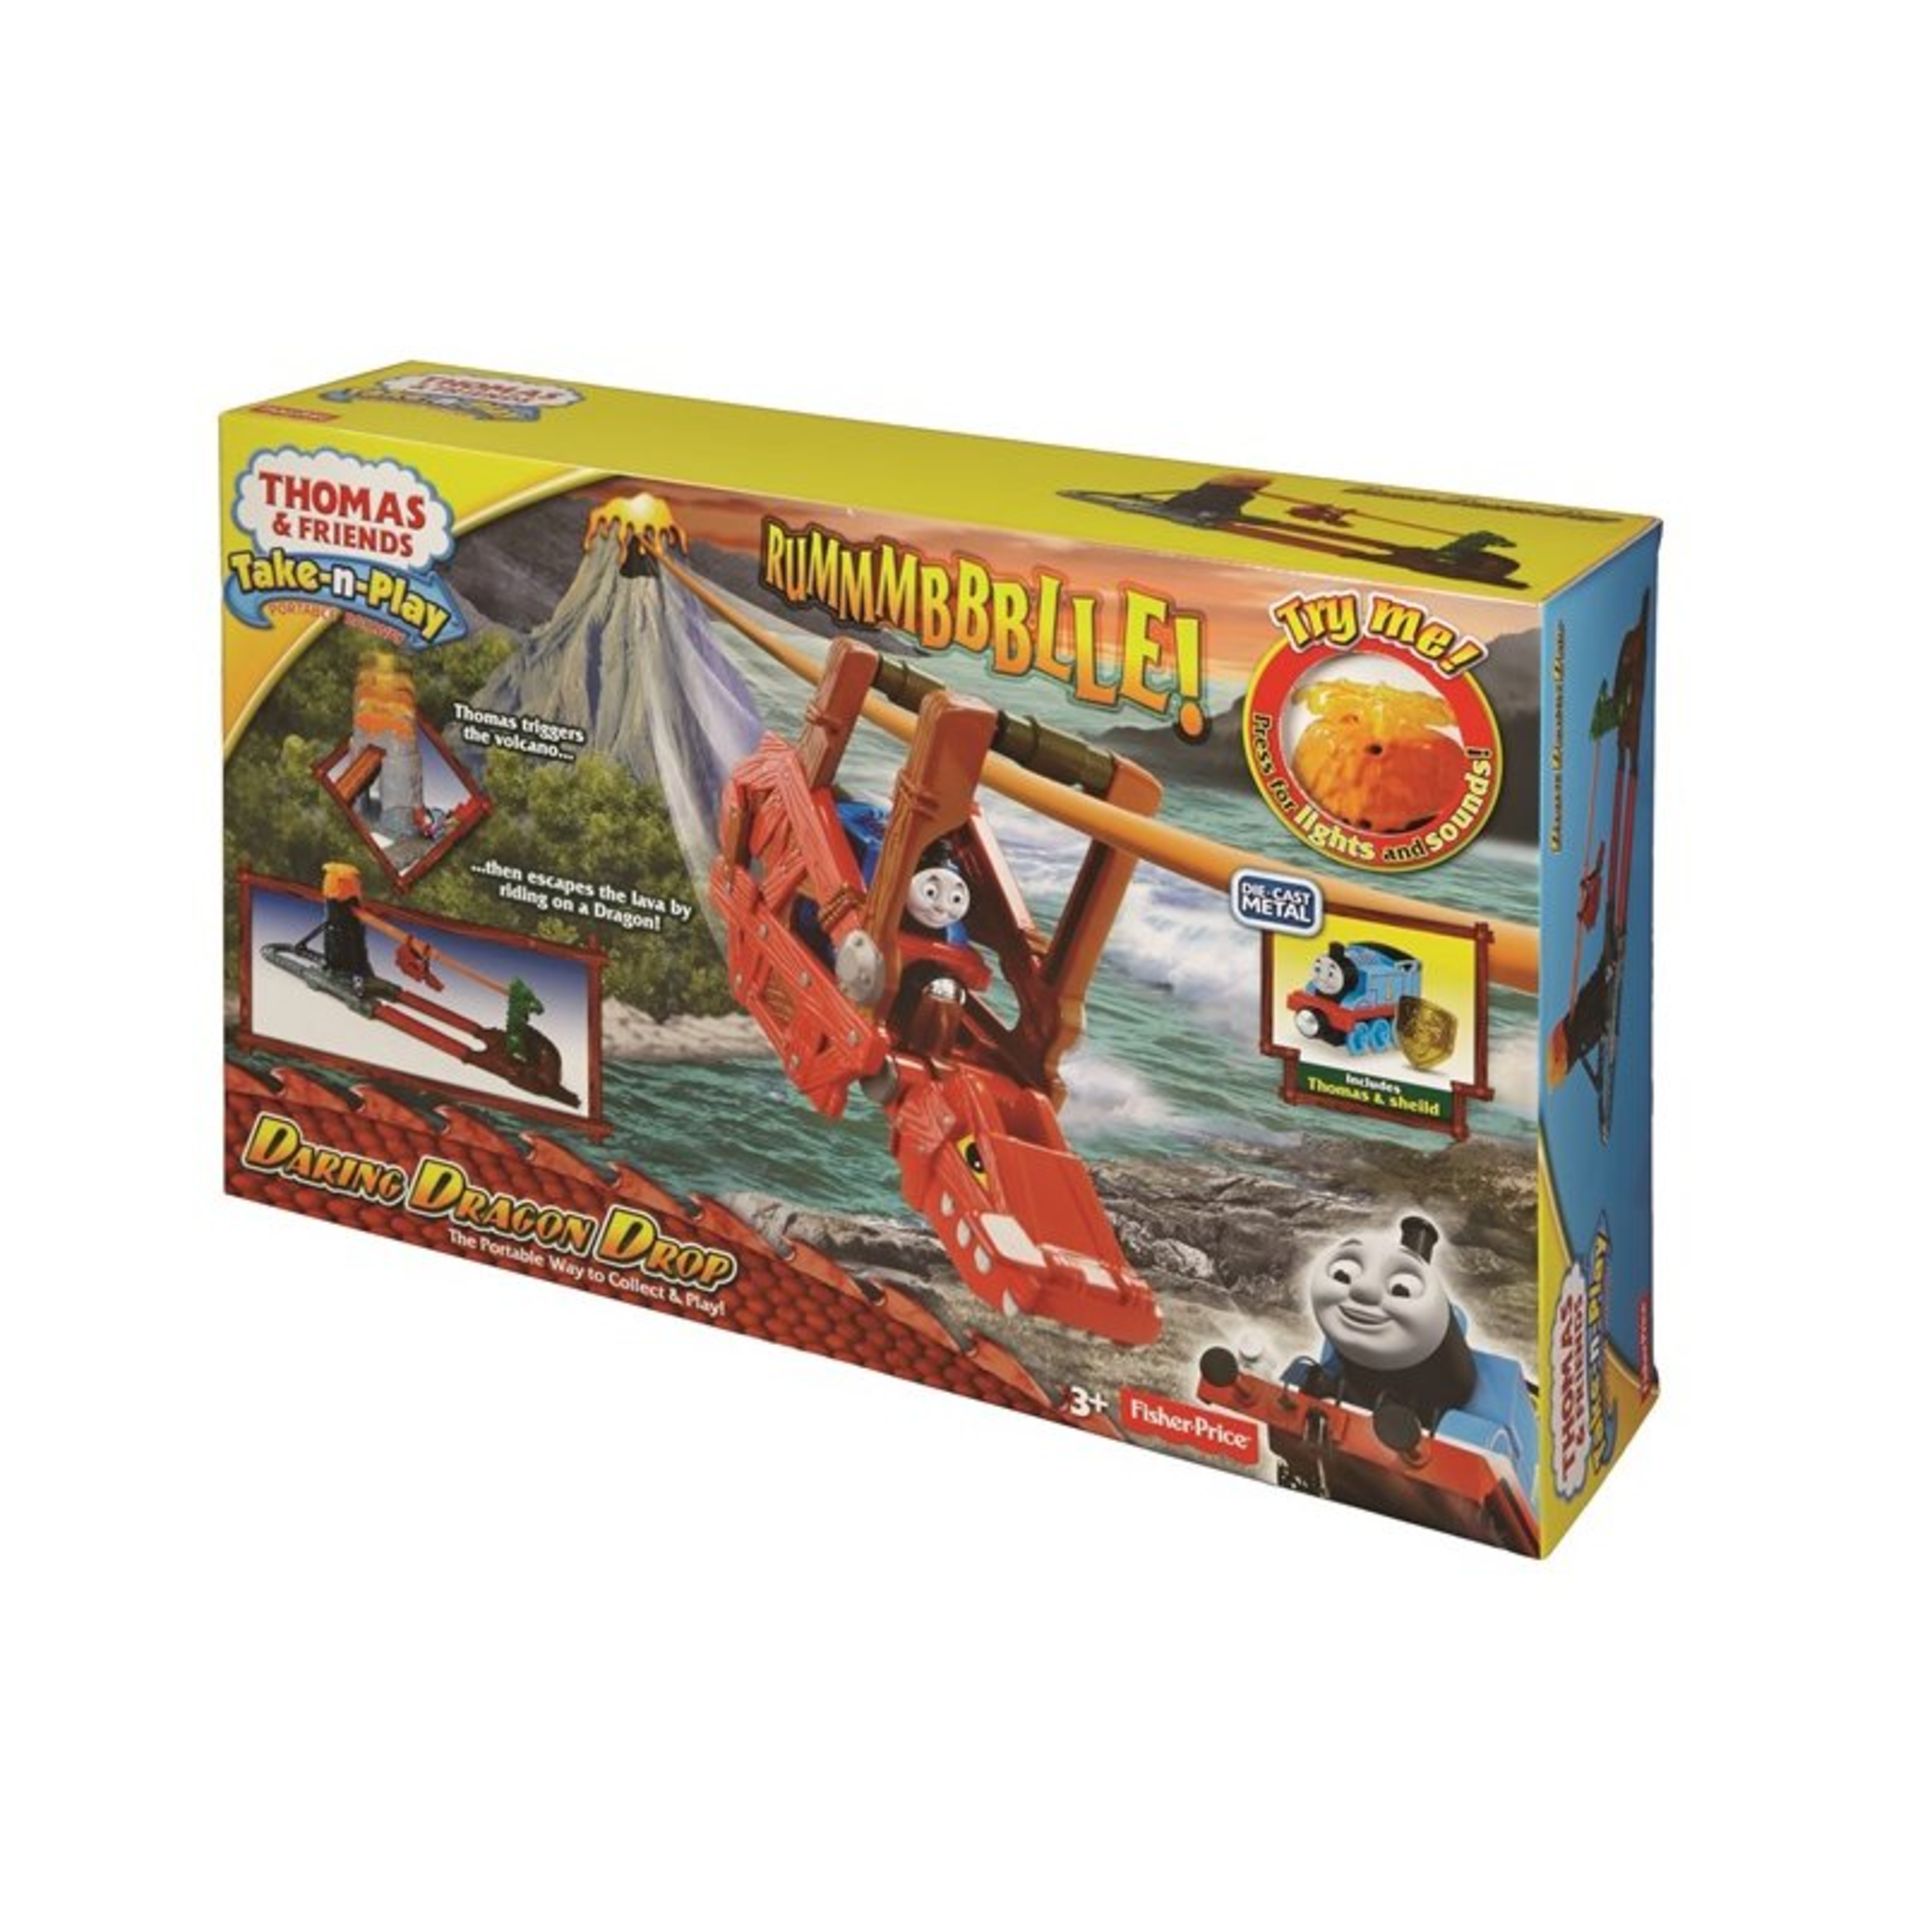 V *TRADE QTY* Brand New Thomas & Friends Daring Dragon Drop Includes Thomas And A Shield With